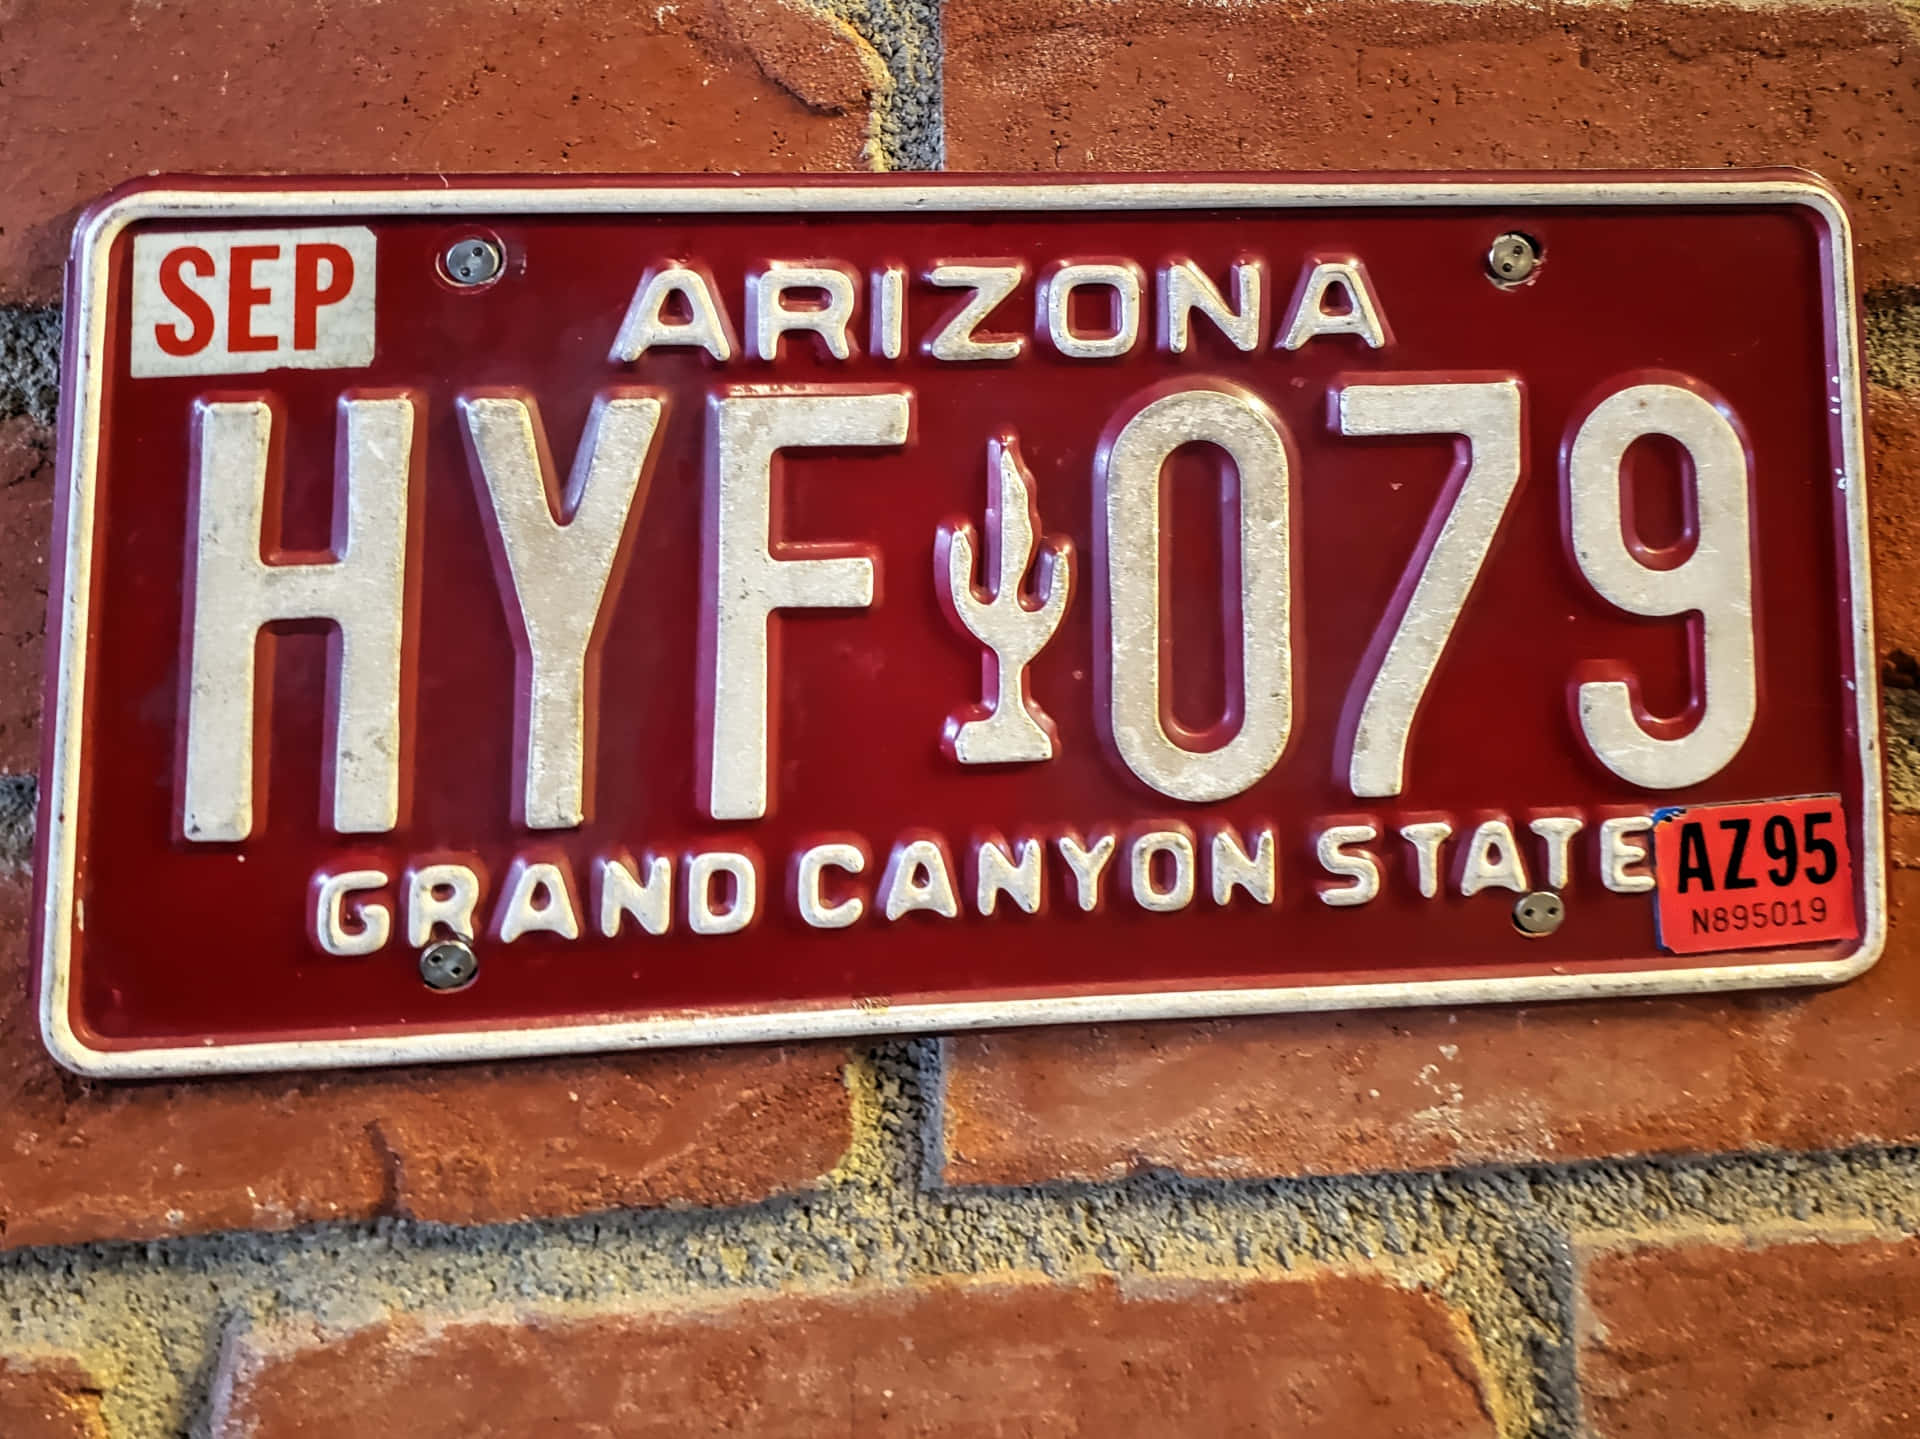 License Plate from a Moving Vehicle